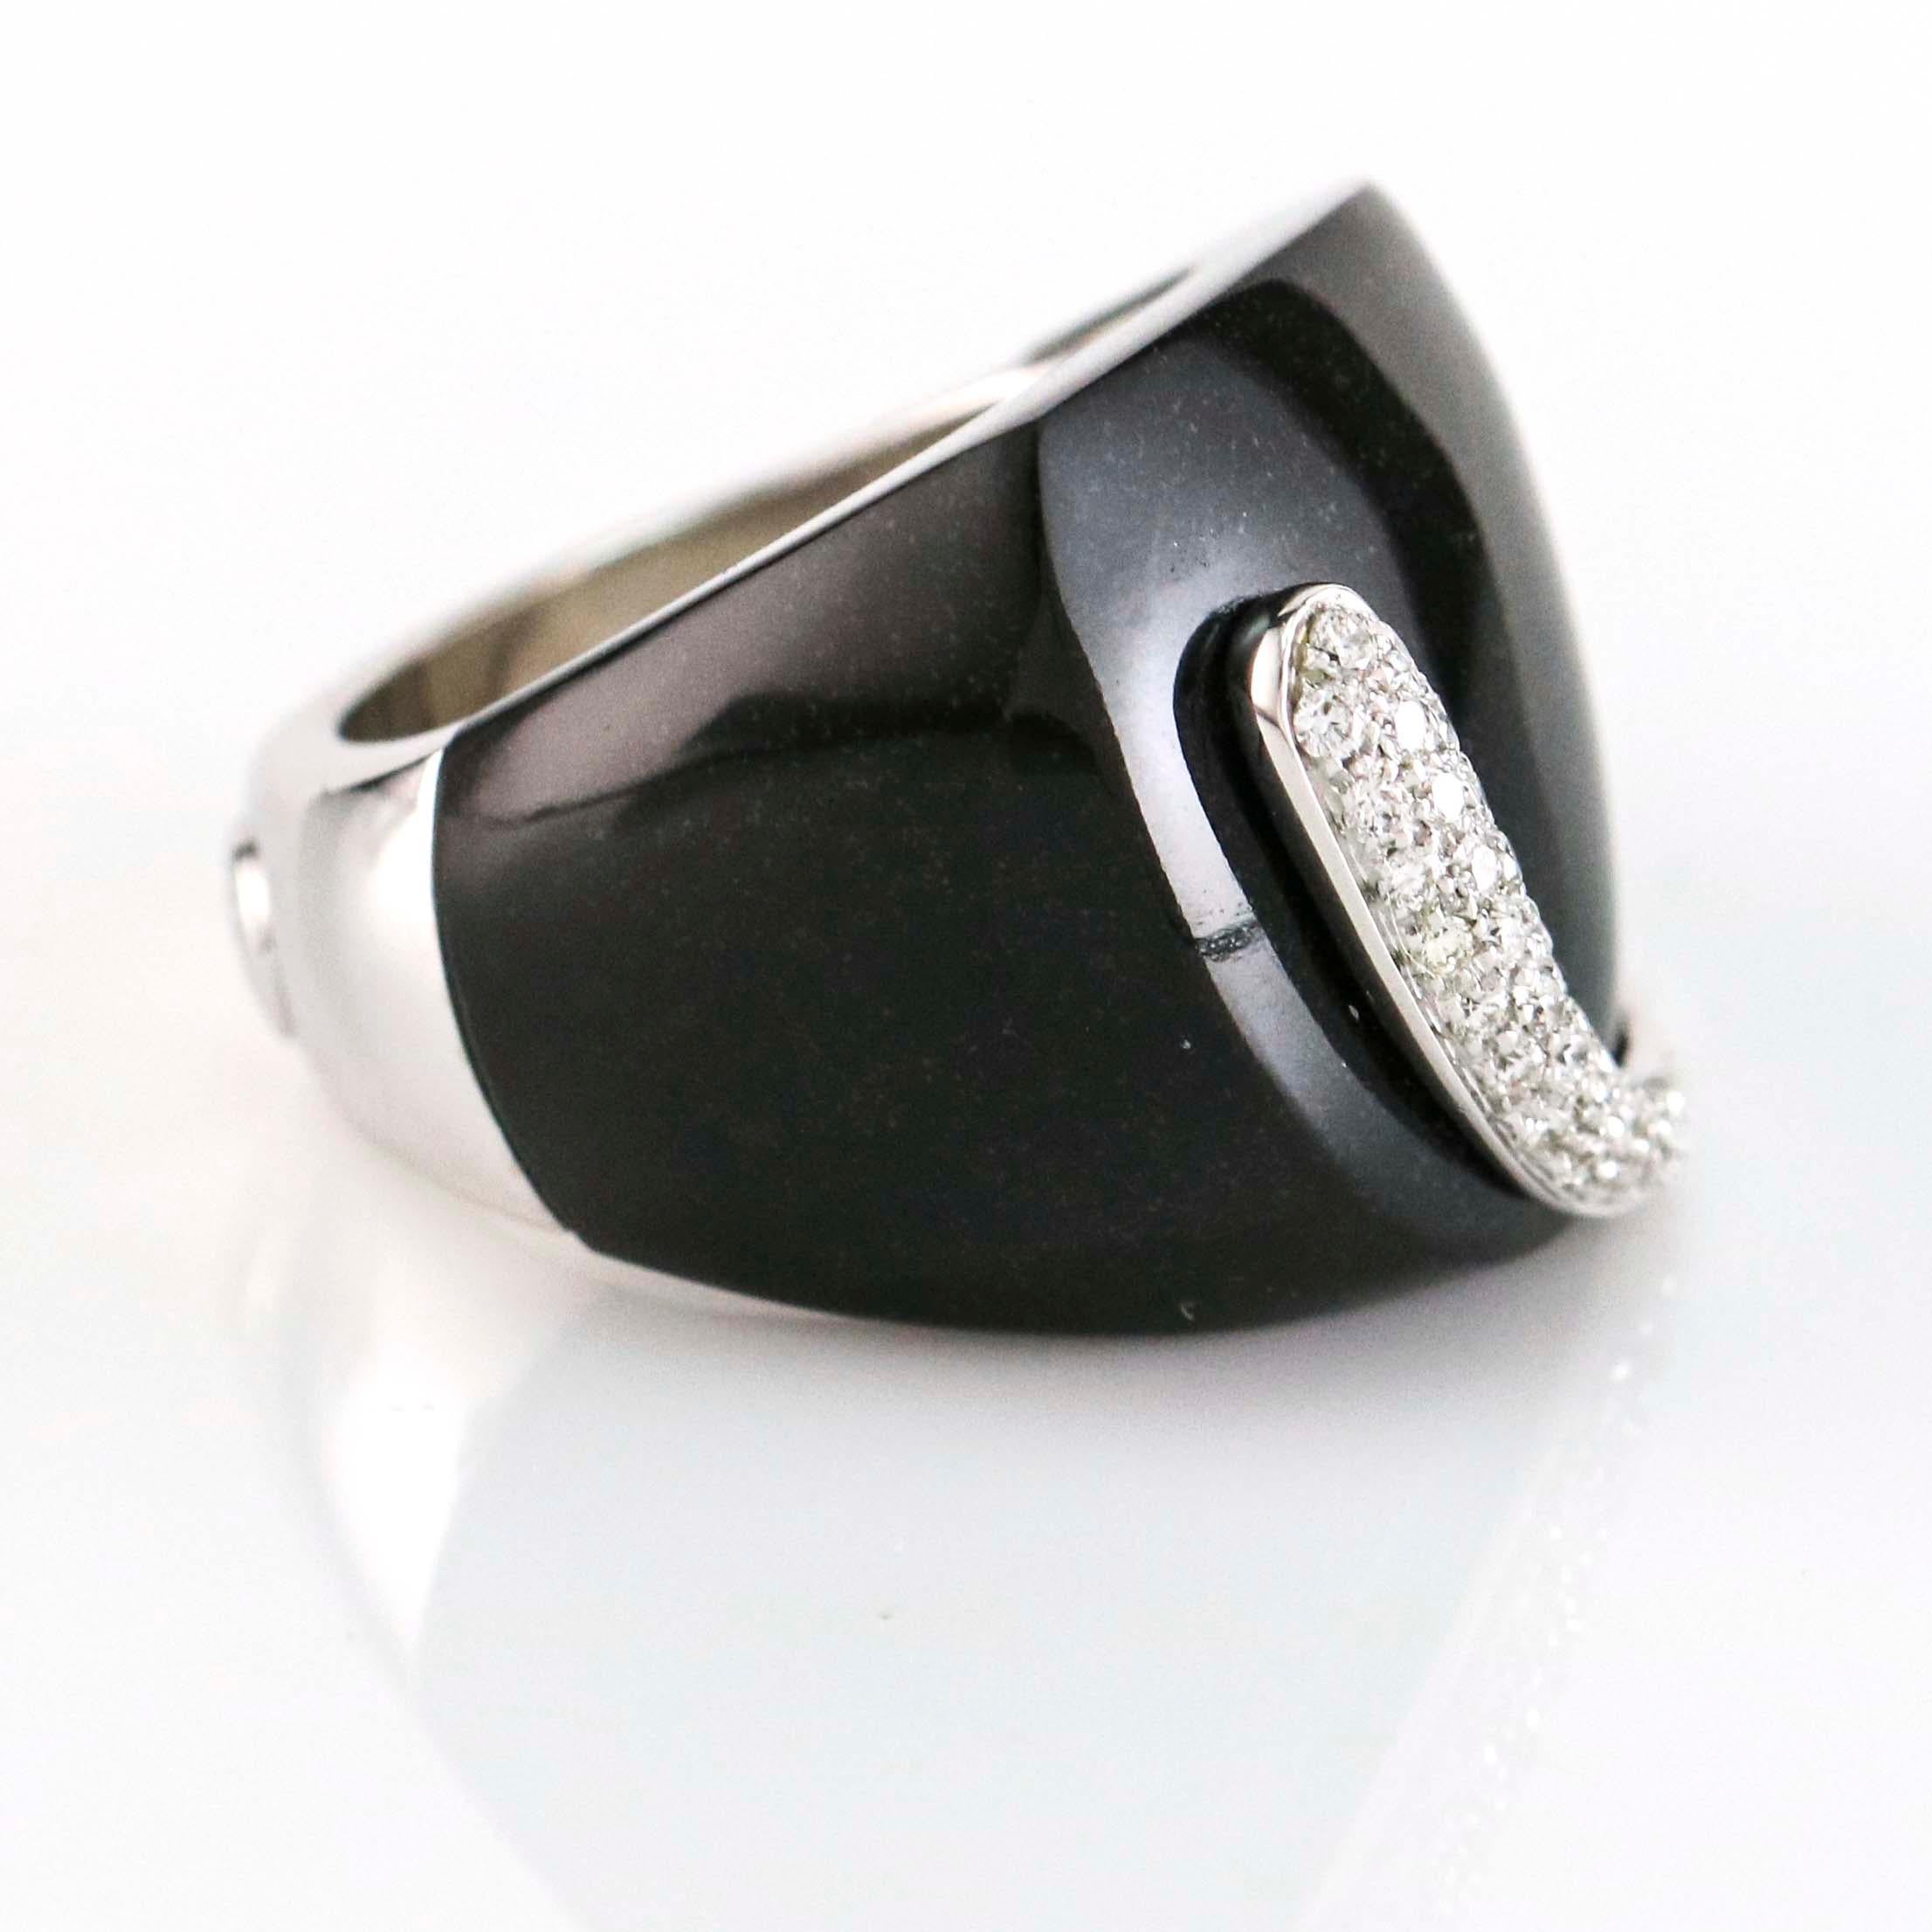 Ebony and diamond contemporary cocktail ring by K Di Kuore crafted in 18k white gold. Size 7. Diamond total carat weight, .30 carat. 